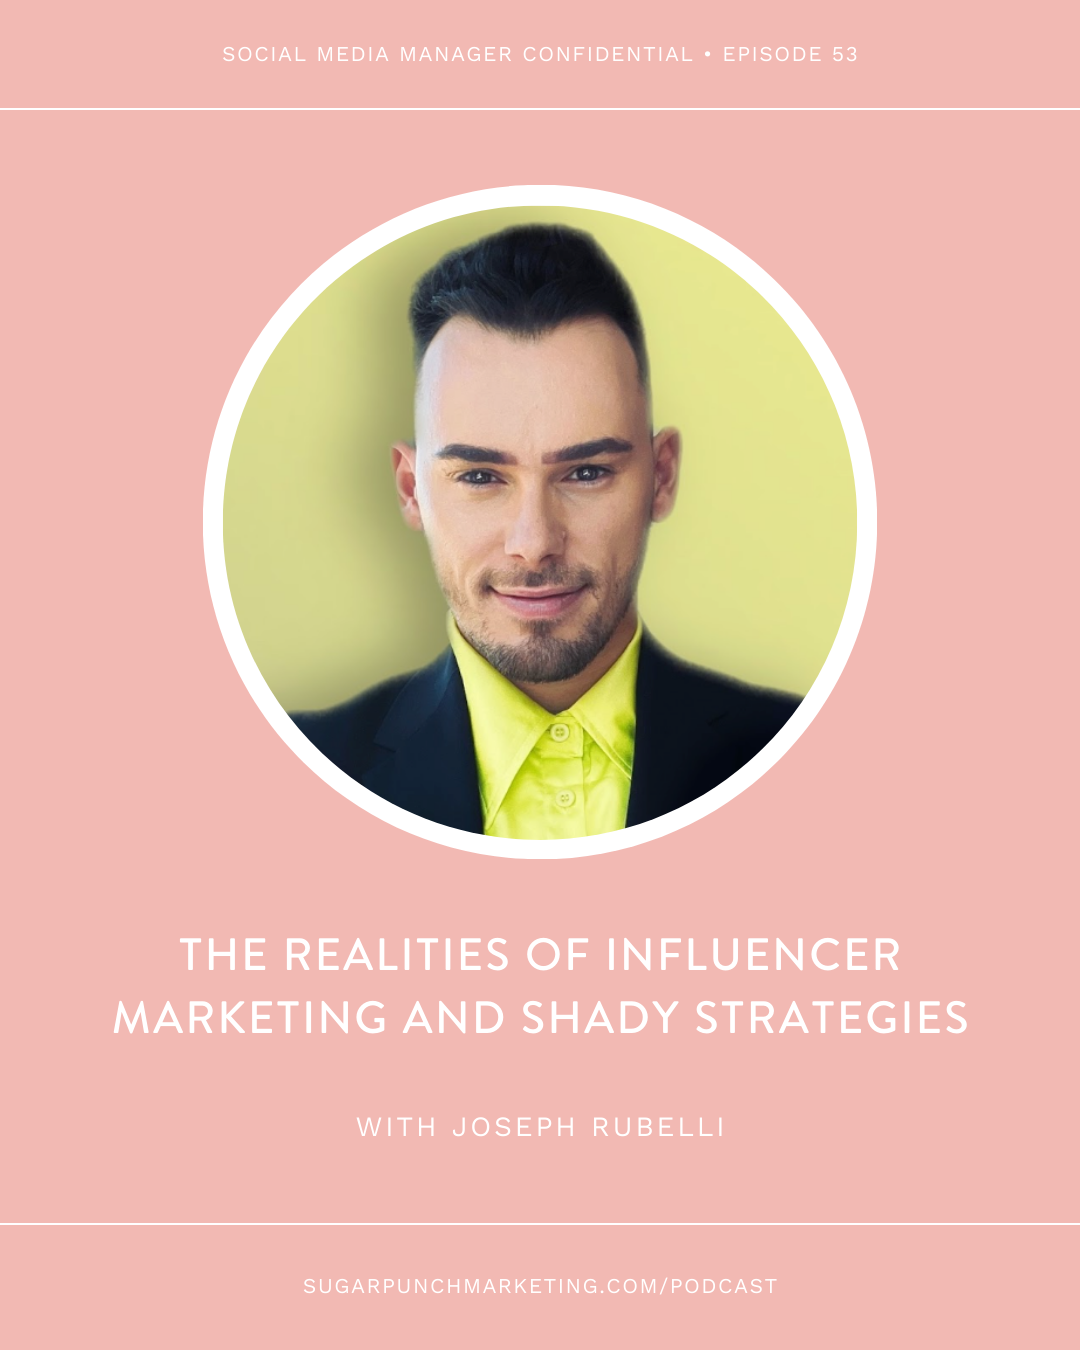 Joseph Rubelli on: The Realities of Influencer Marketing and Shady Strategies